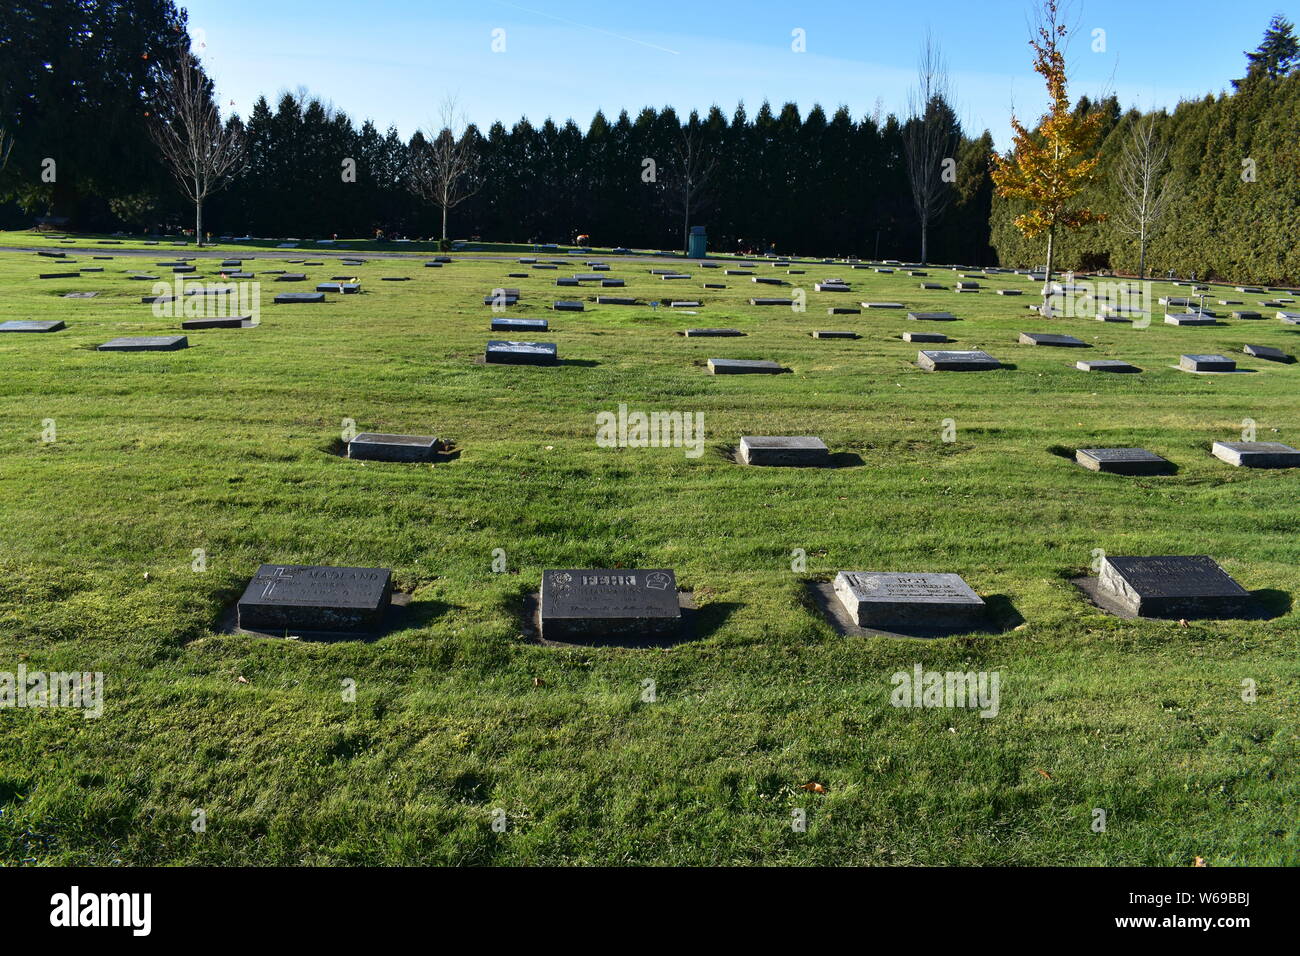 A well-kept cemetery in Canada Stock Photo